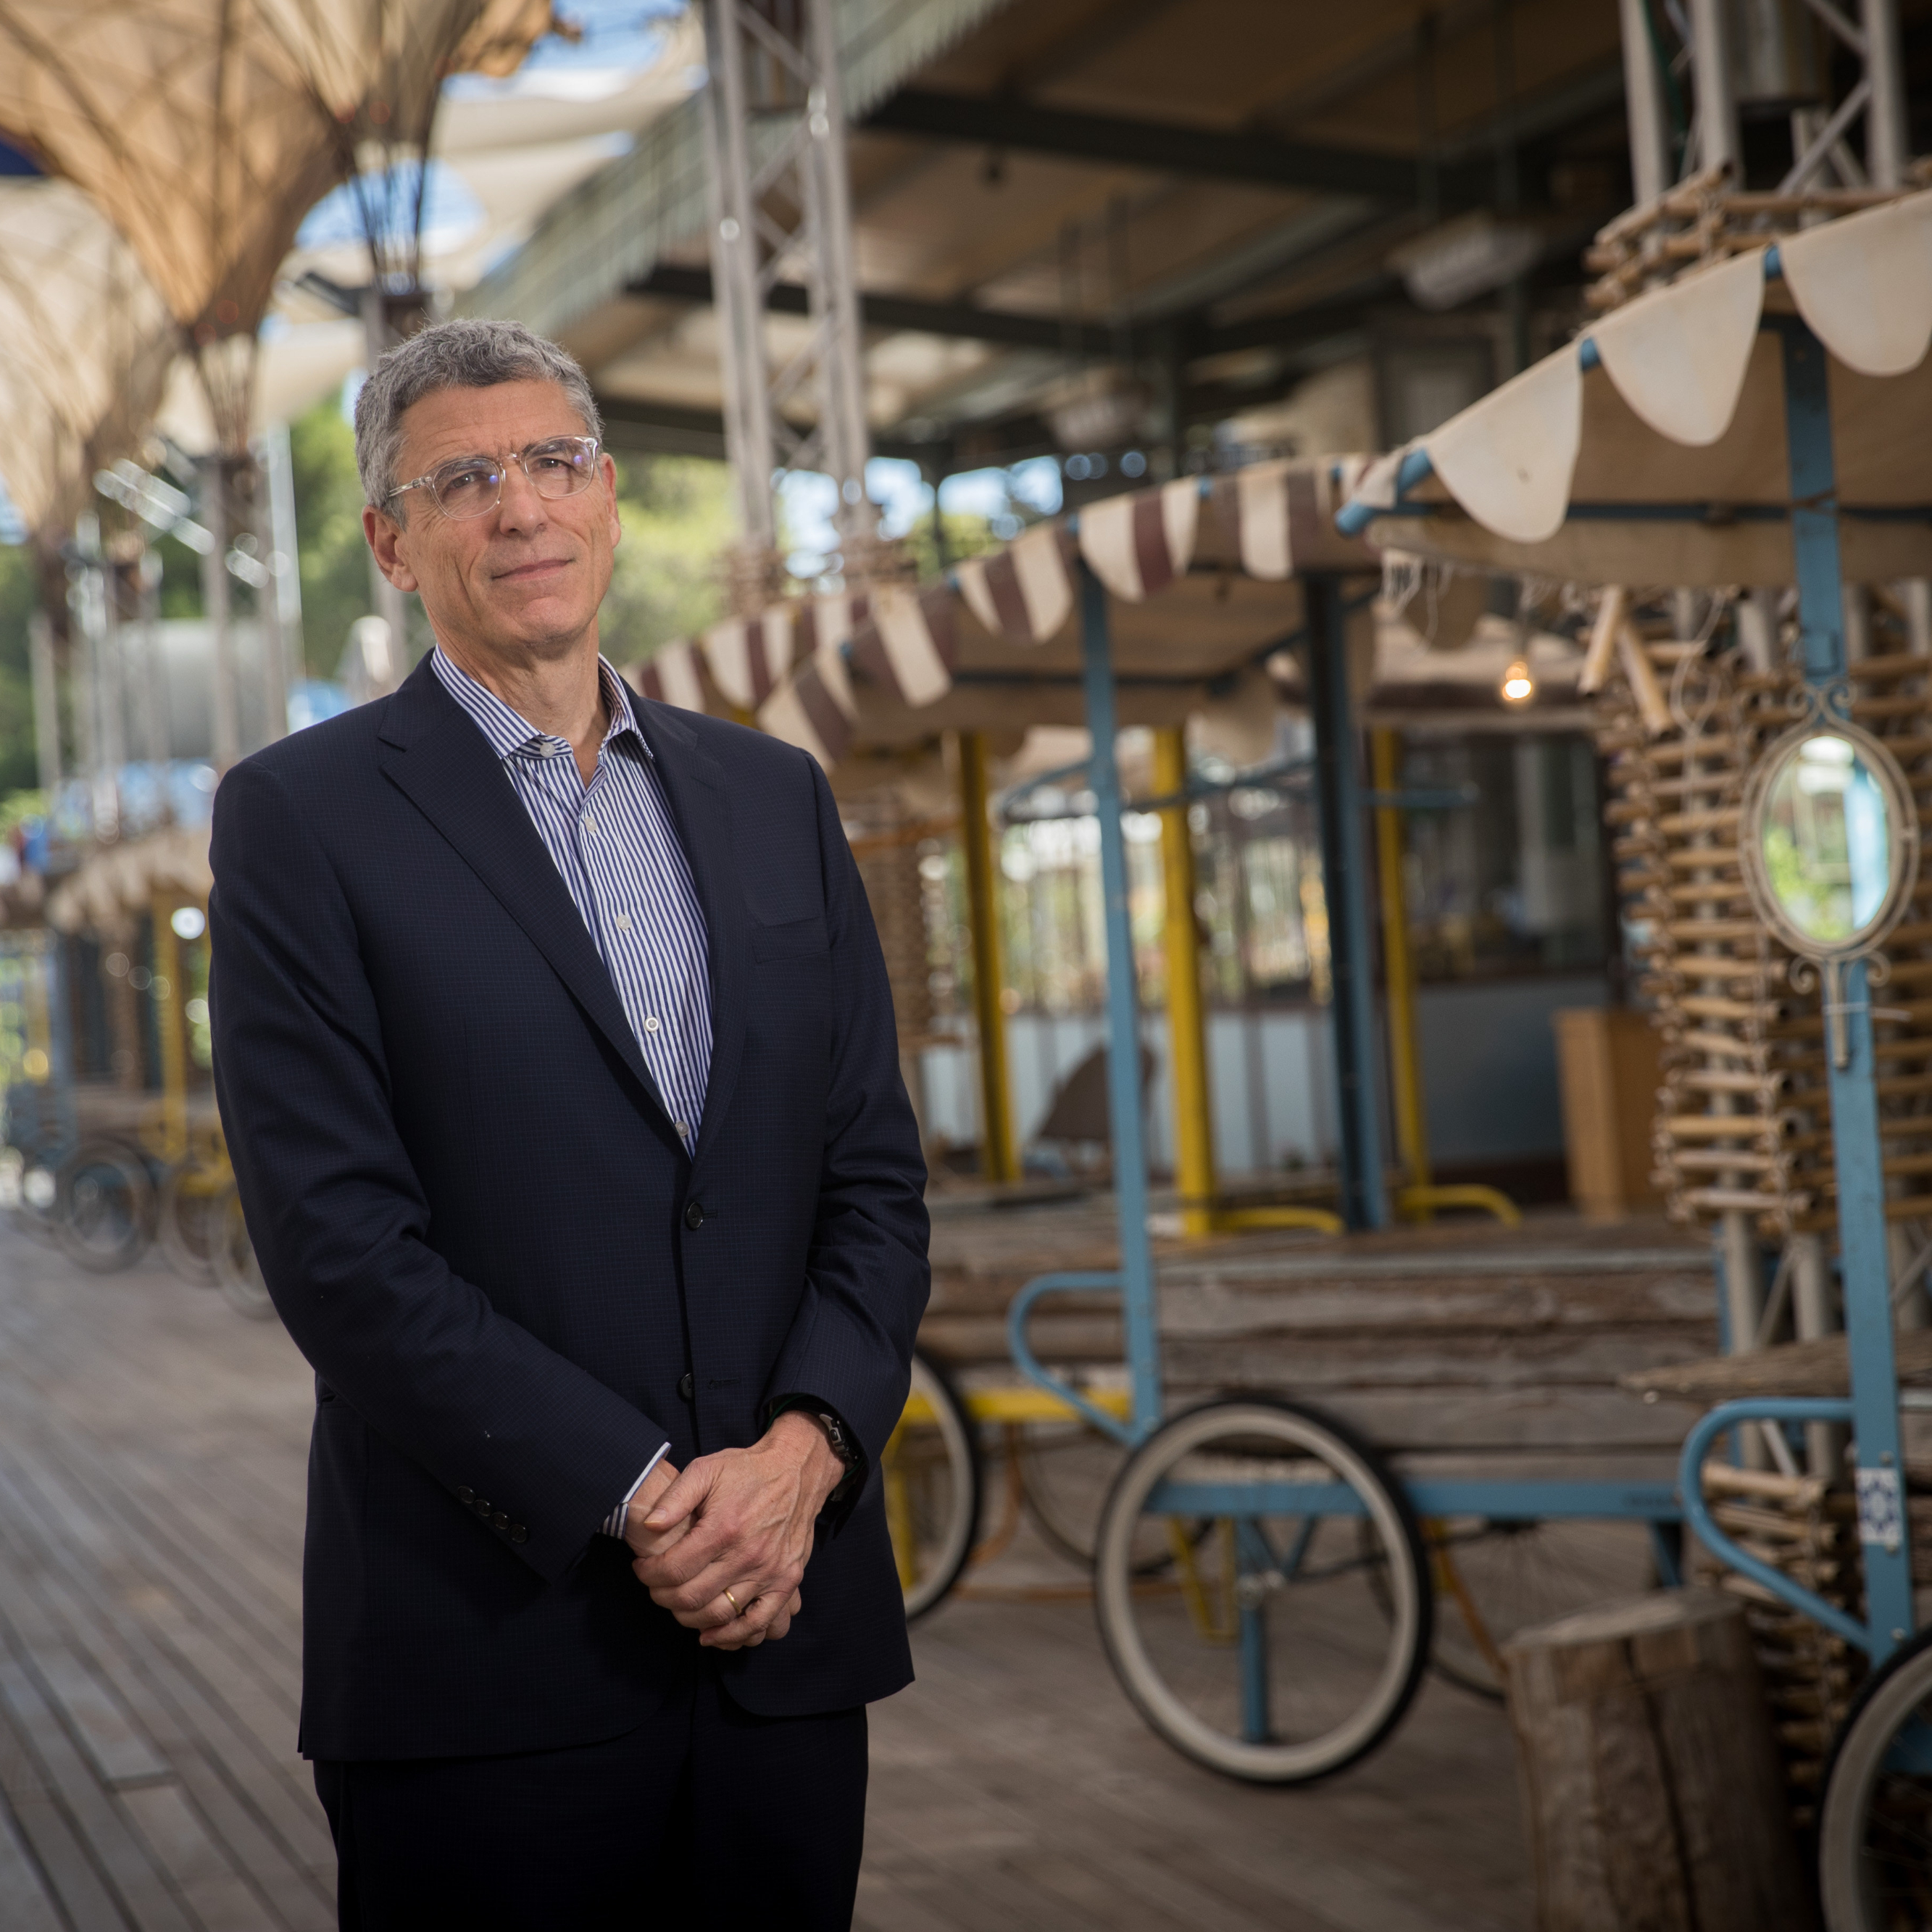 What Matters Now to Rabbi Rick Jacobs: Coalitions of faith and conscience